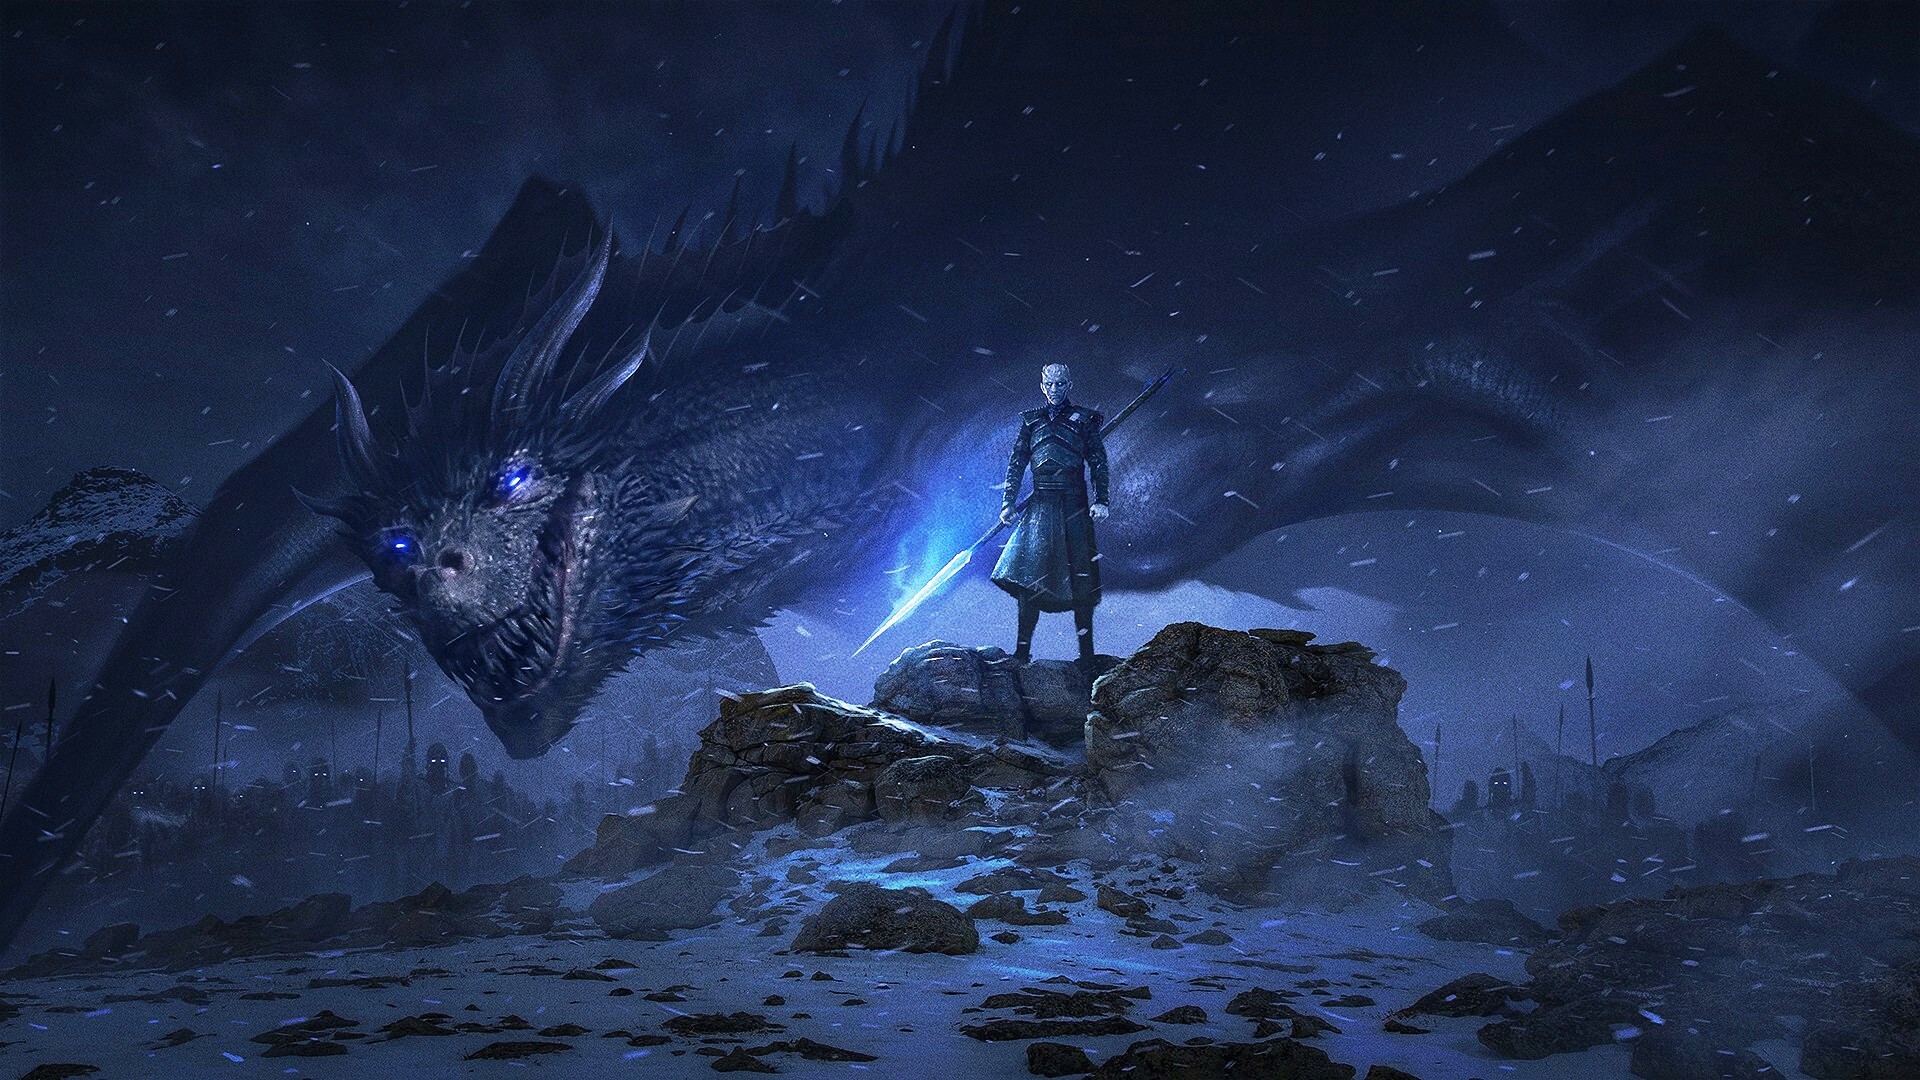 Game of Thrones: Season 8, A prequel series, House of the Dragon, premiered on HBO in 2022. 1920x1080 Full HD Background.